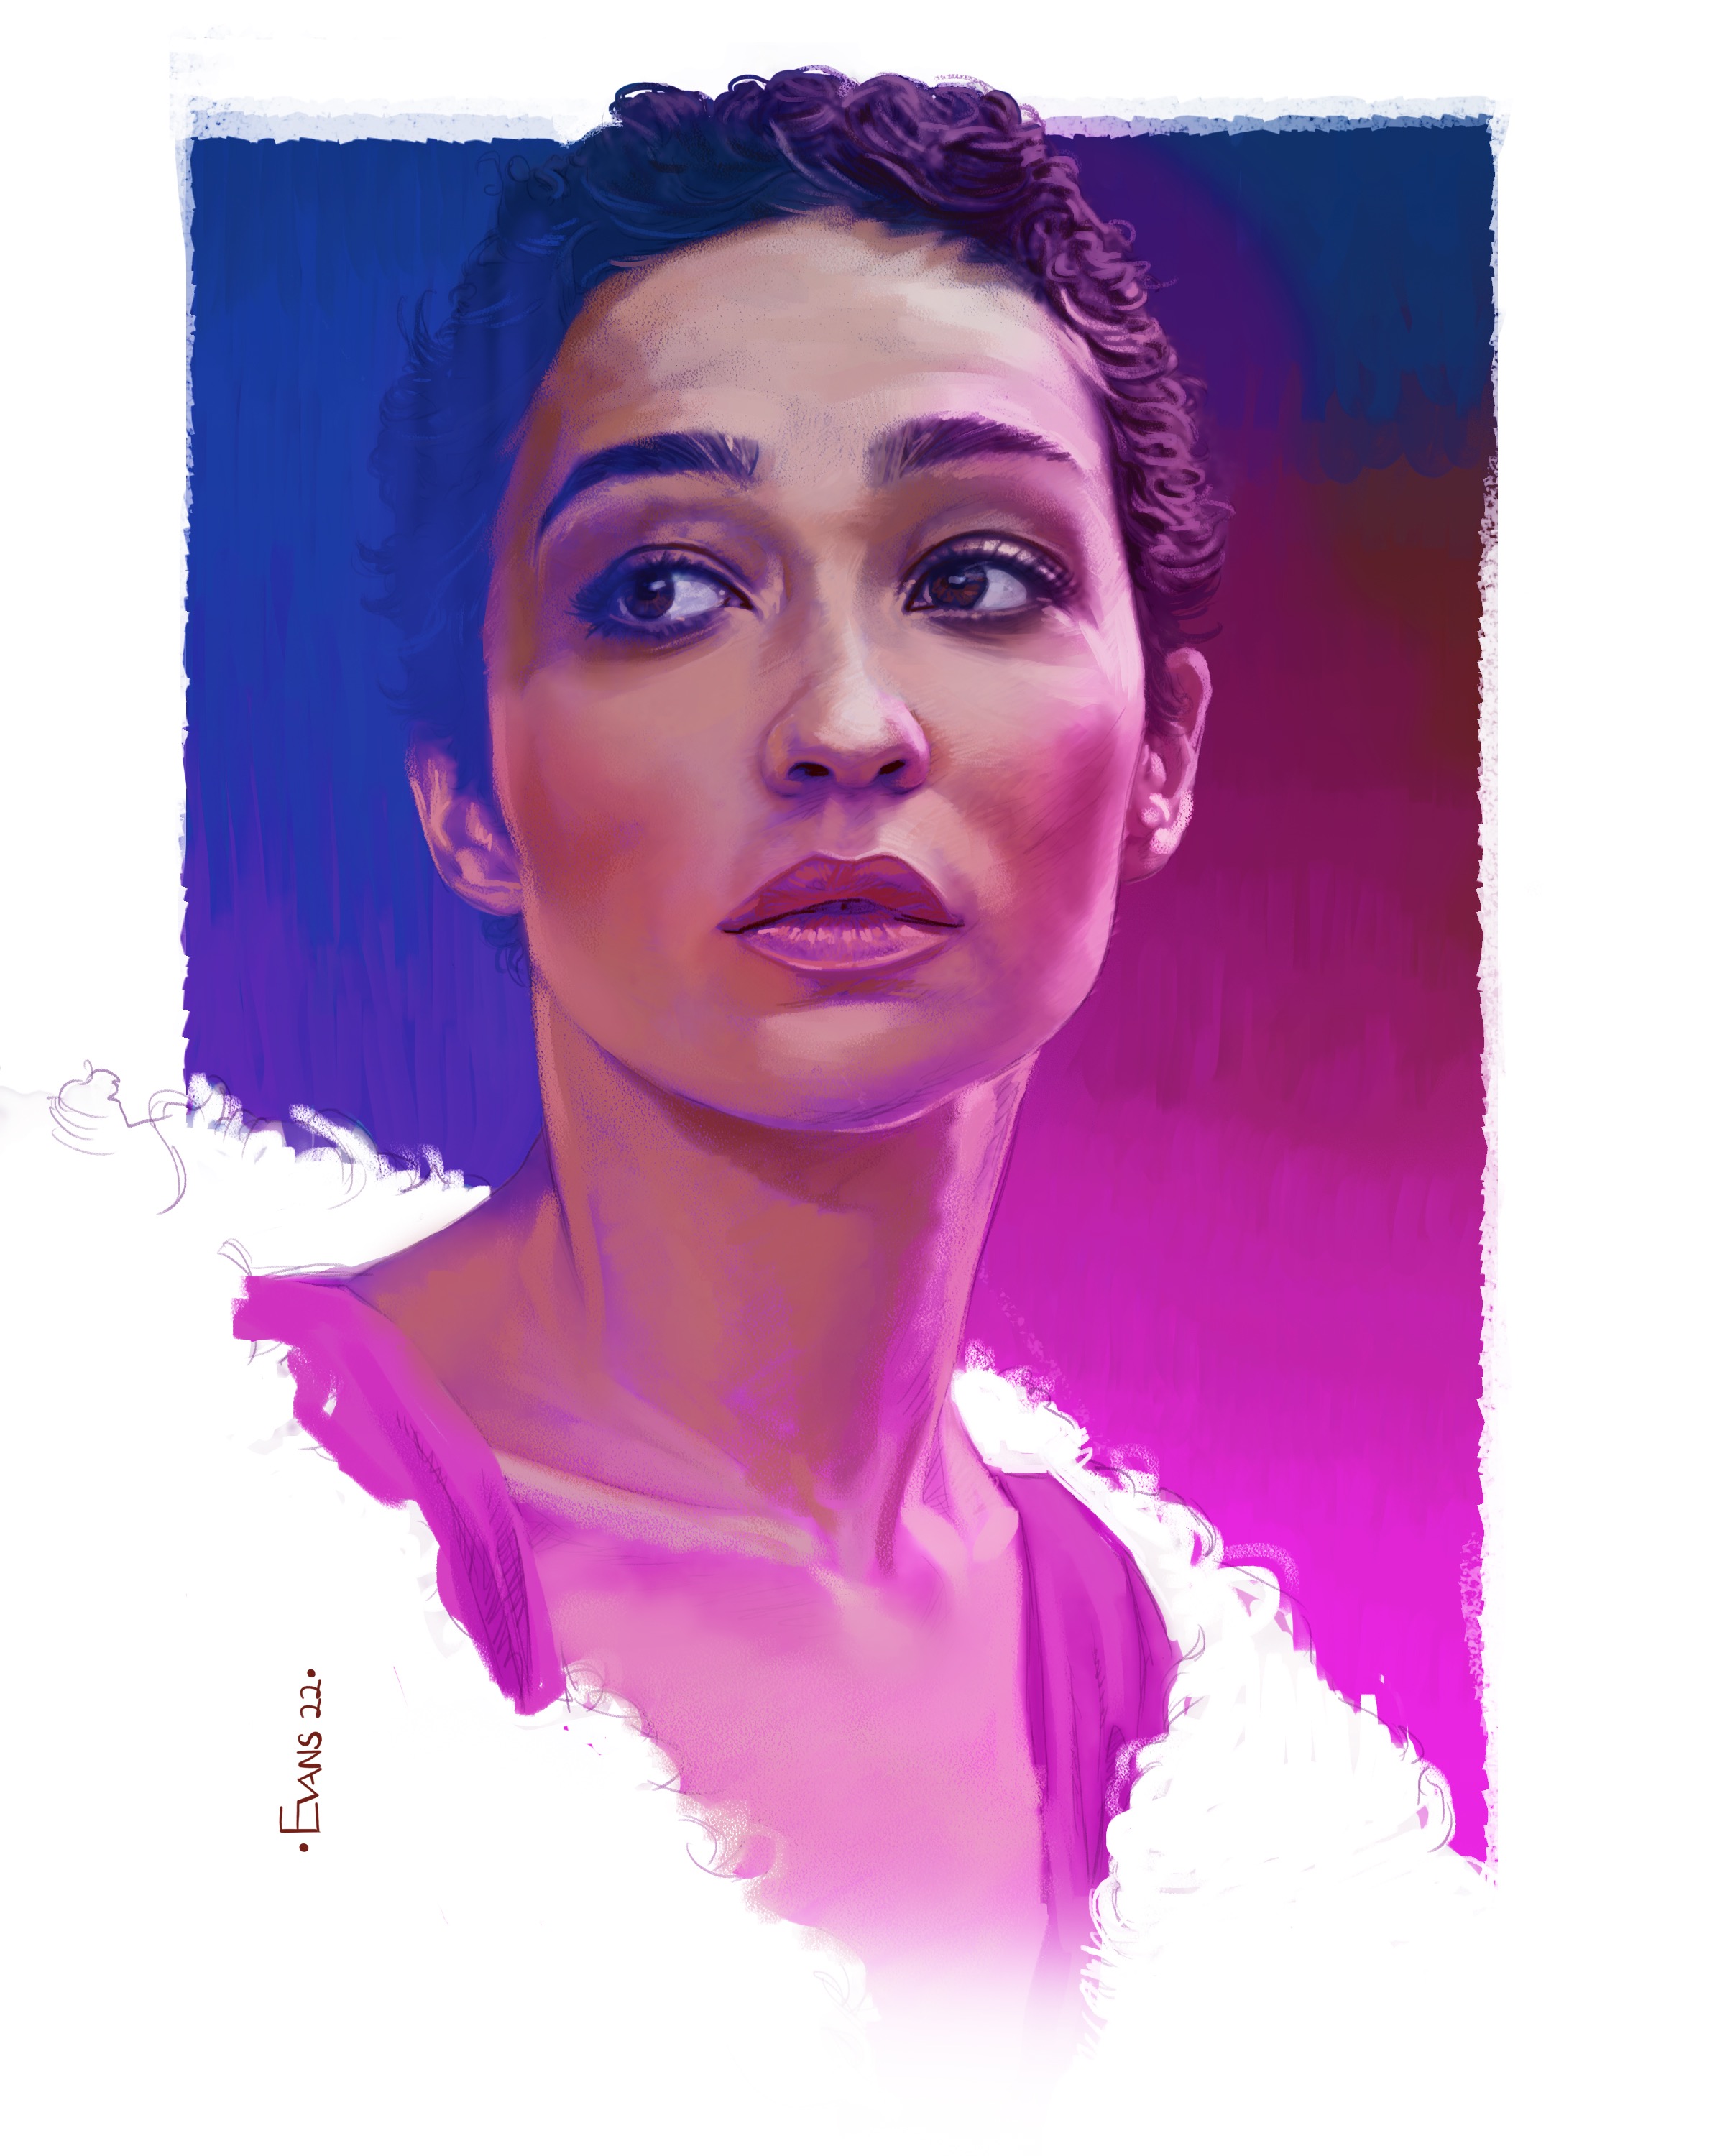 Portrait of actress Ruth Negga is an Irish actress known for the AMC television series Preacher by Award winning artist Mark Evans.